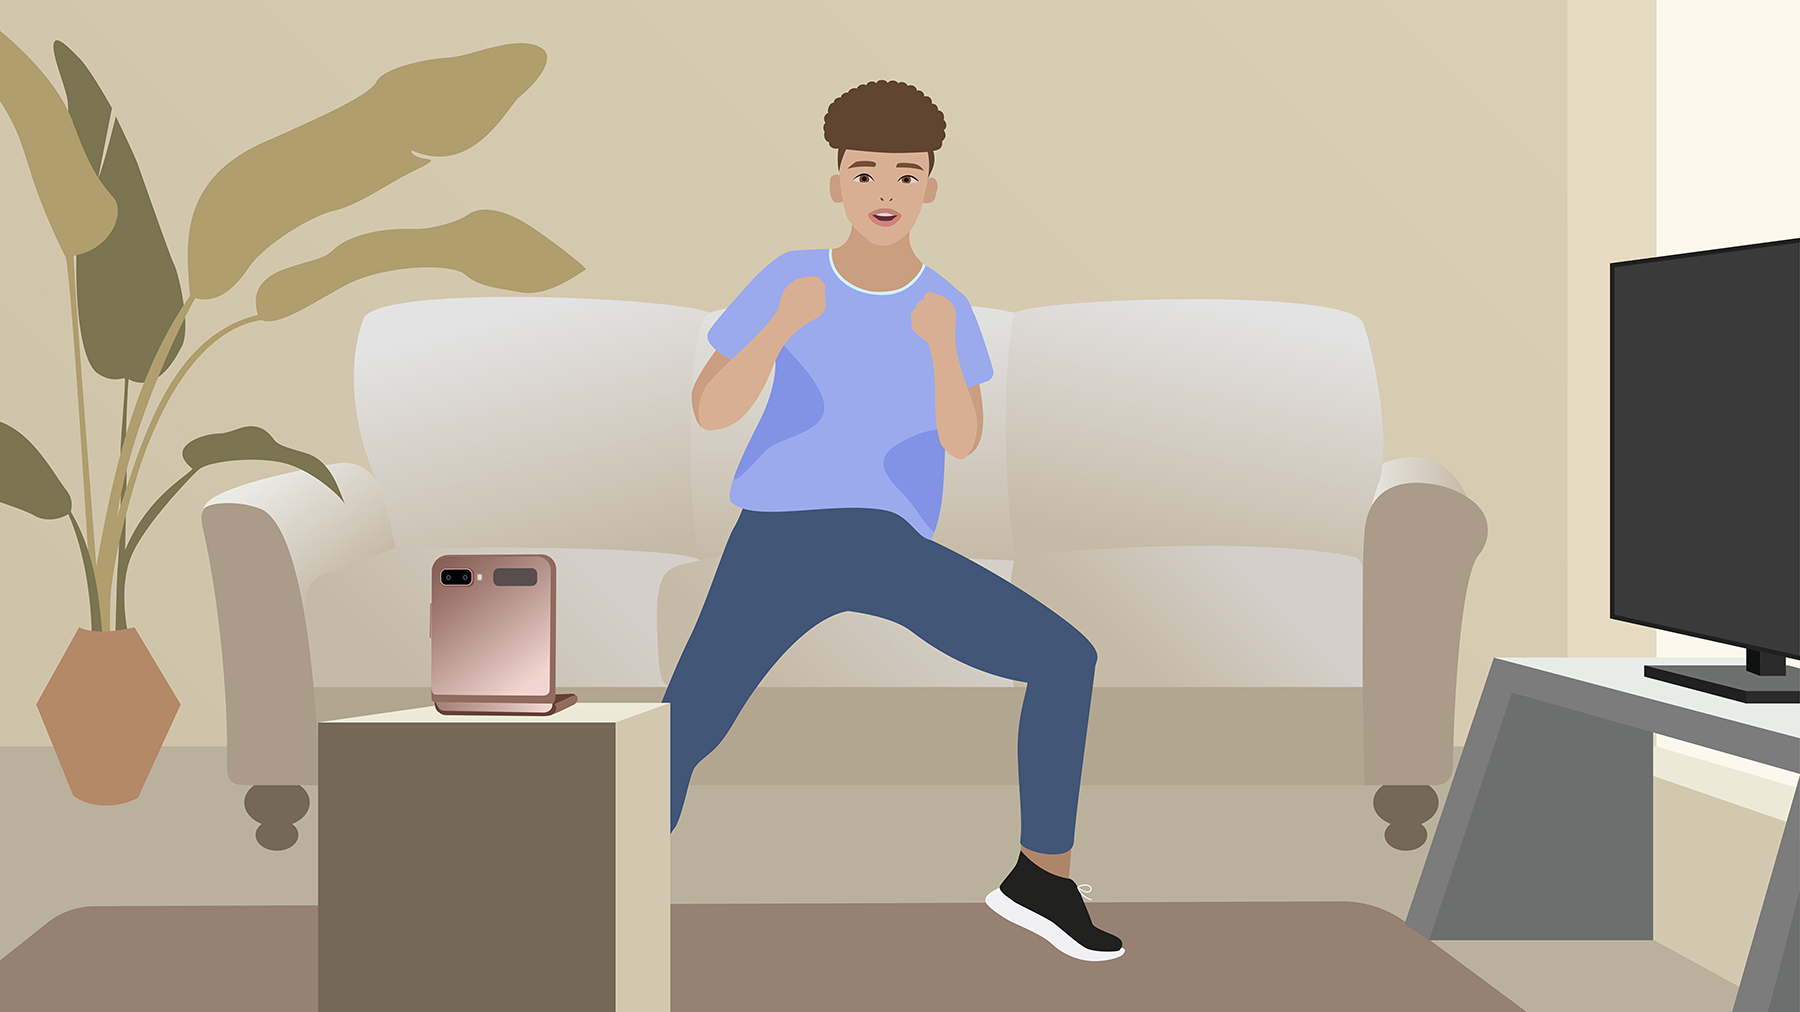 Illustration of a content creator filming a dance challenge video hands-free with the Galaxy Z Flip.